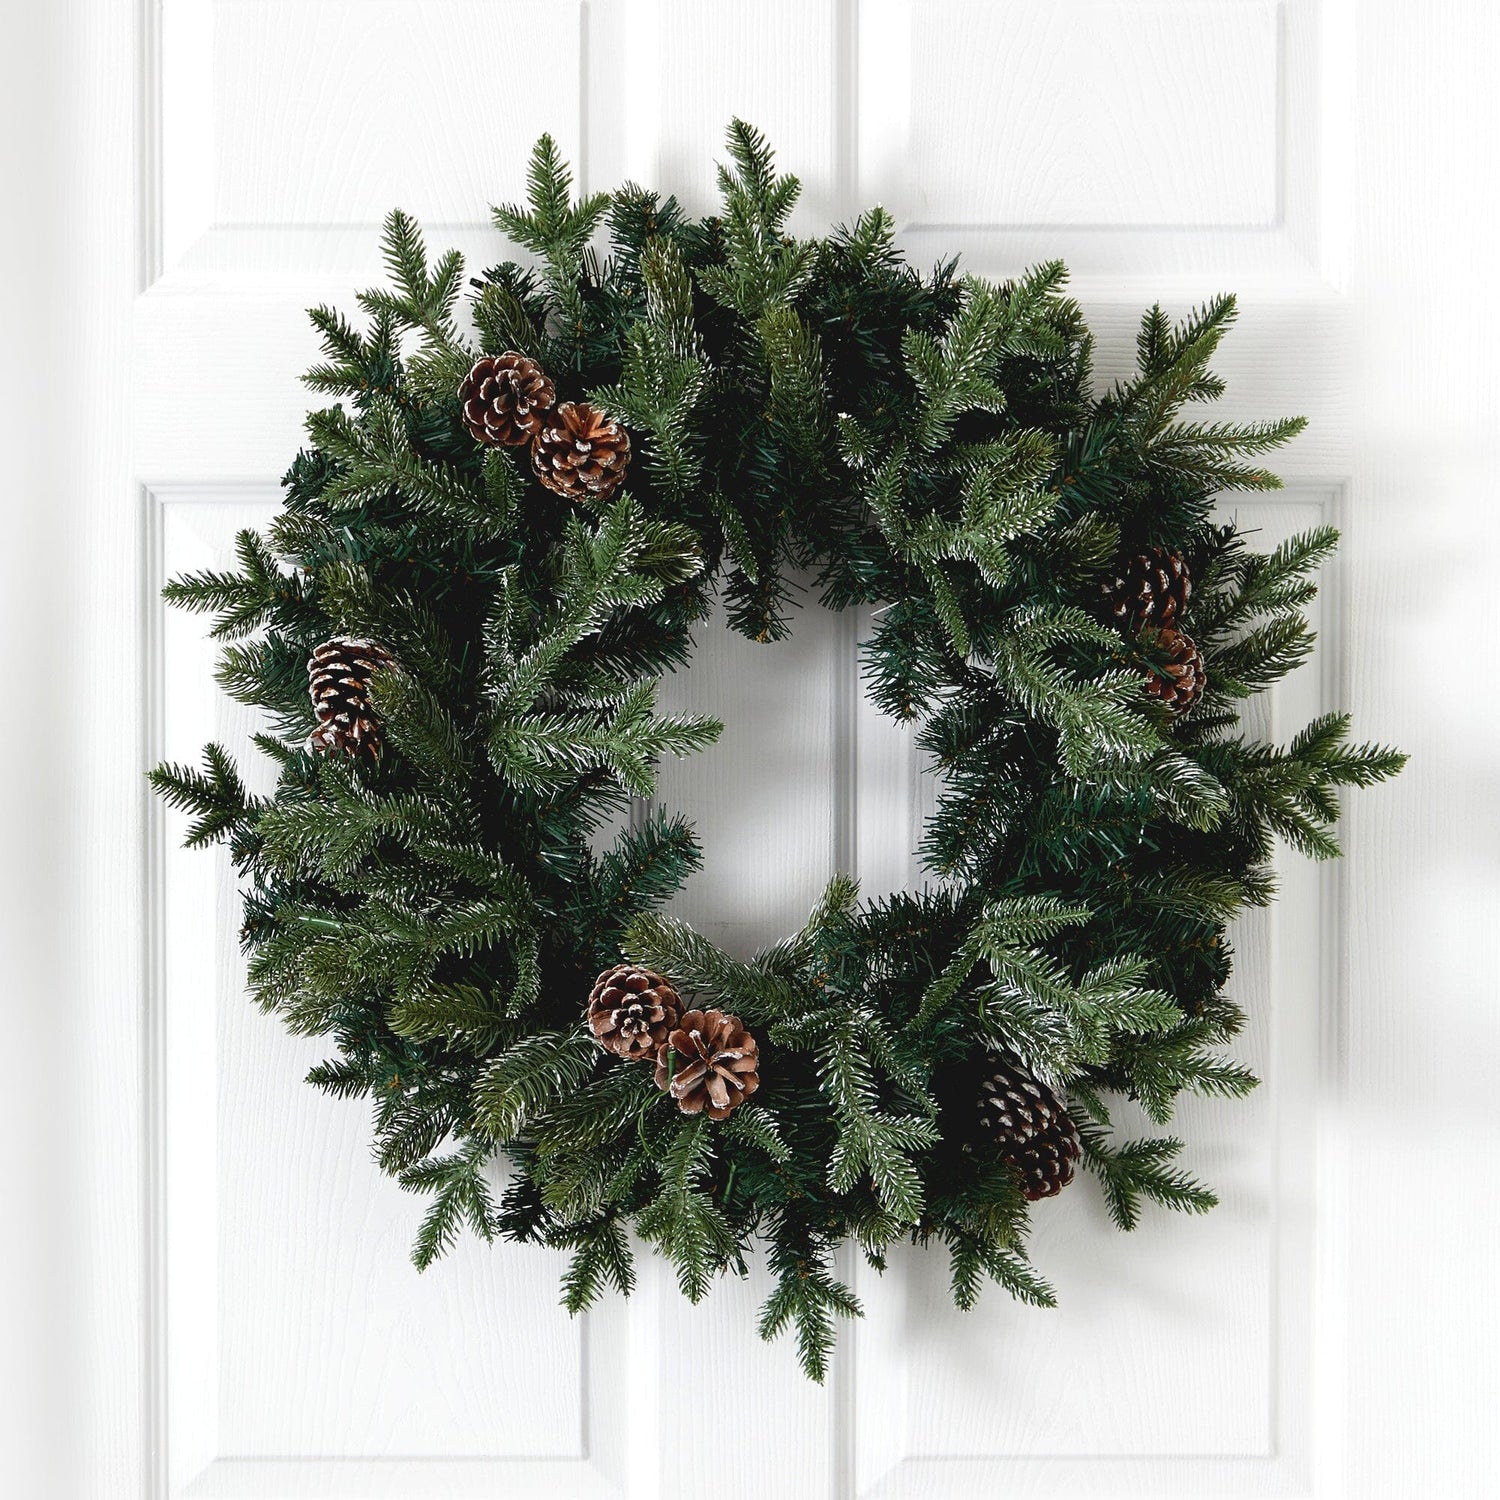 24” Snowed Pinecone Artificial Christmas Wreath with 35 Clear LED Lights